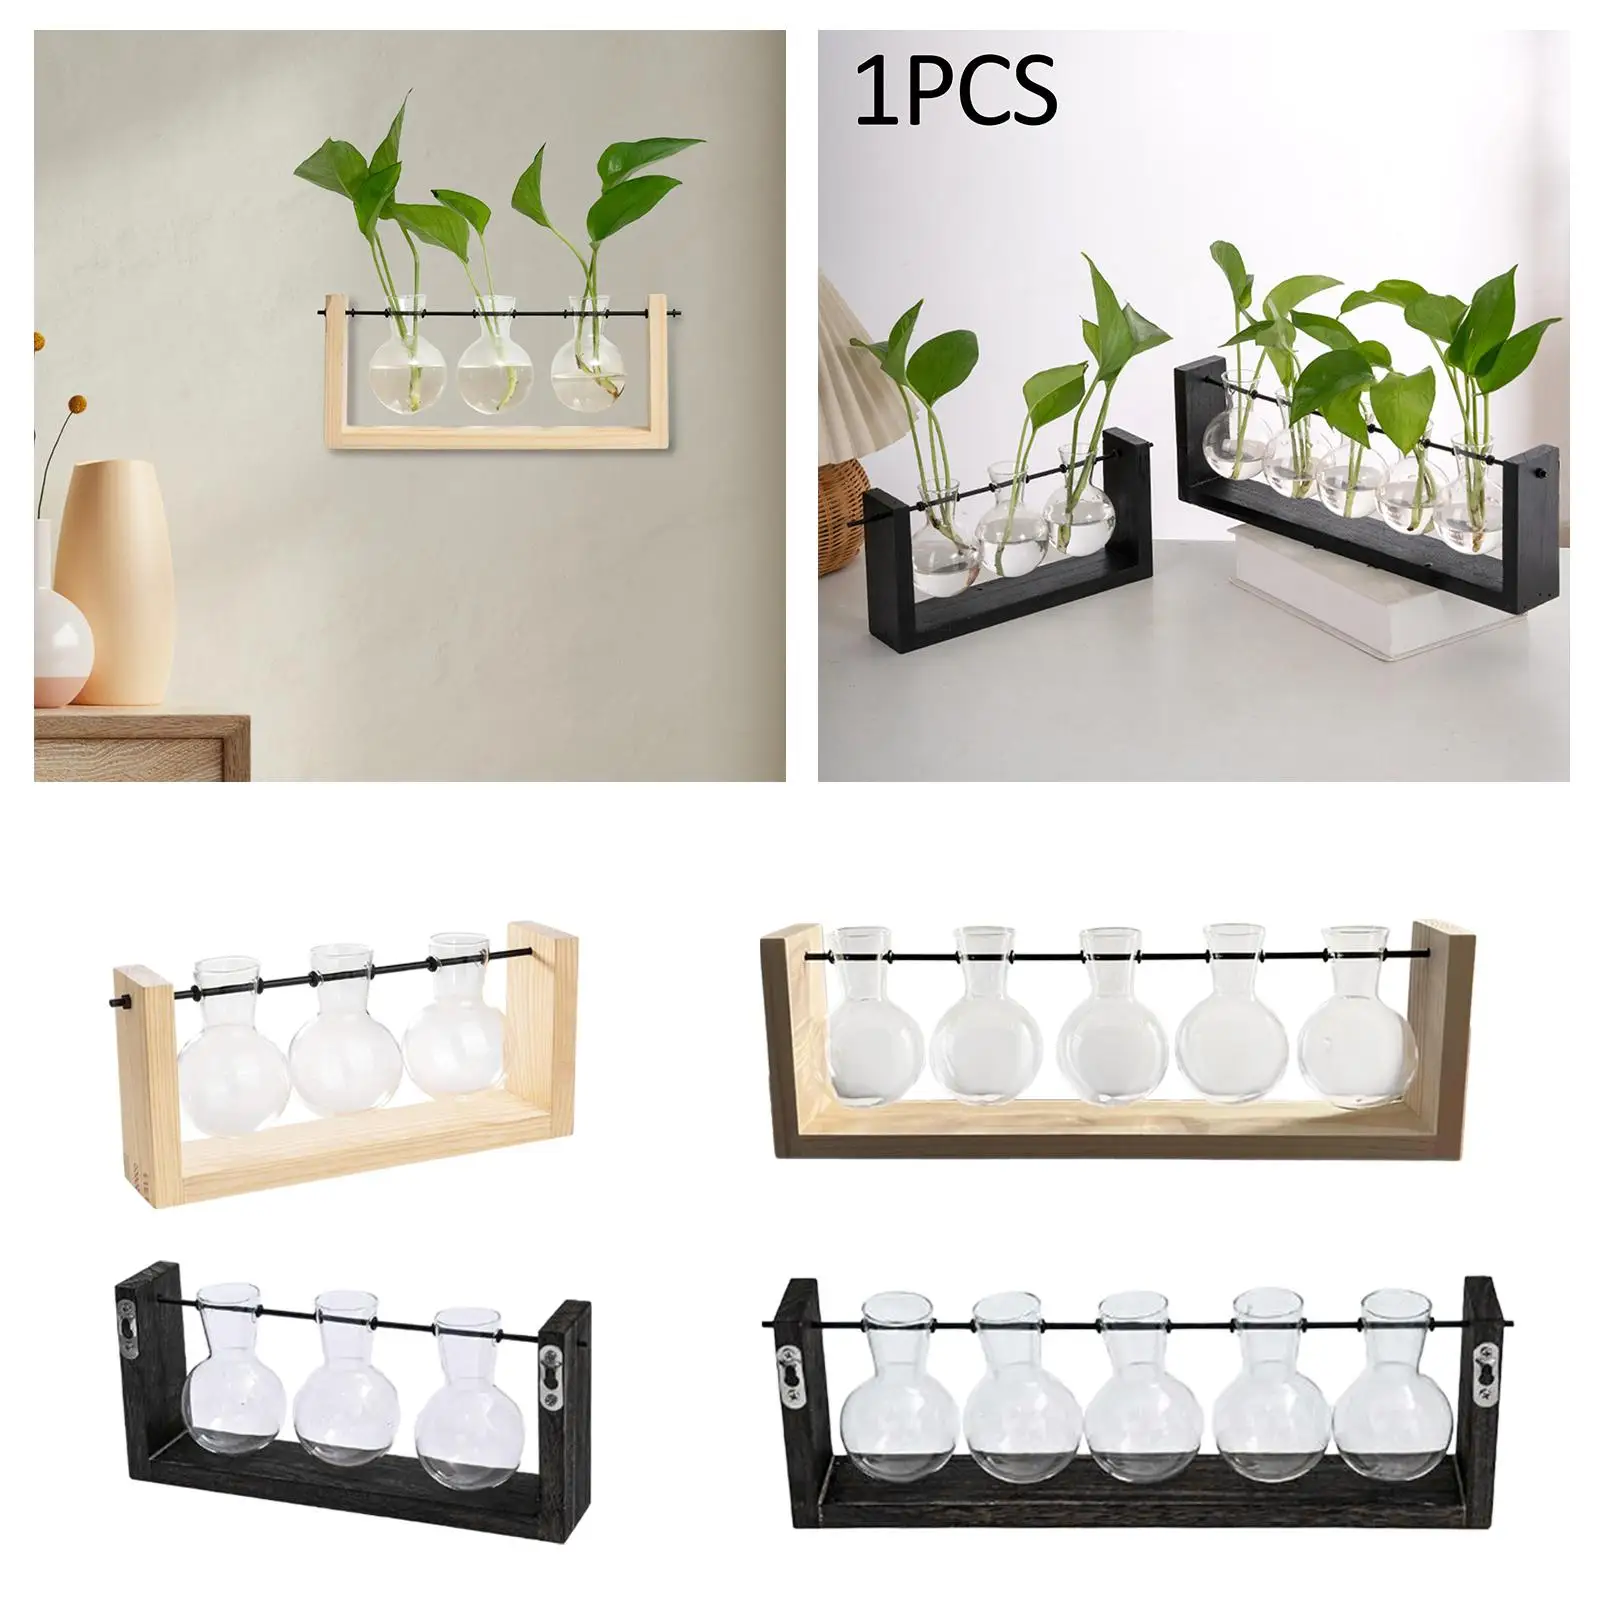 Hydroponic Plant Vases Wall Hanging Glass Hanging Planter Terrarium for Home Indoor Hydroponic Plant Cutting Kitchen Living Room